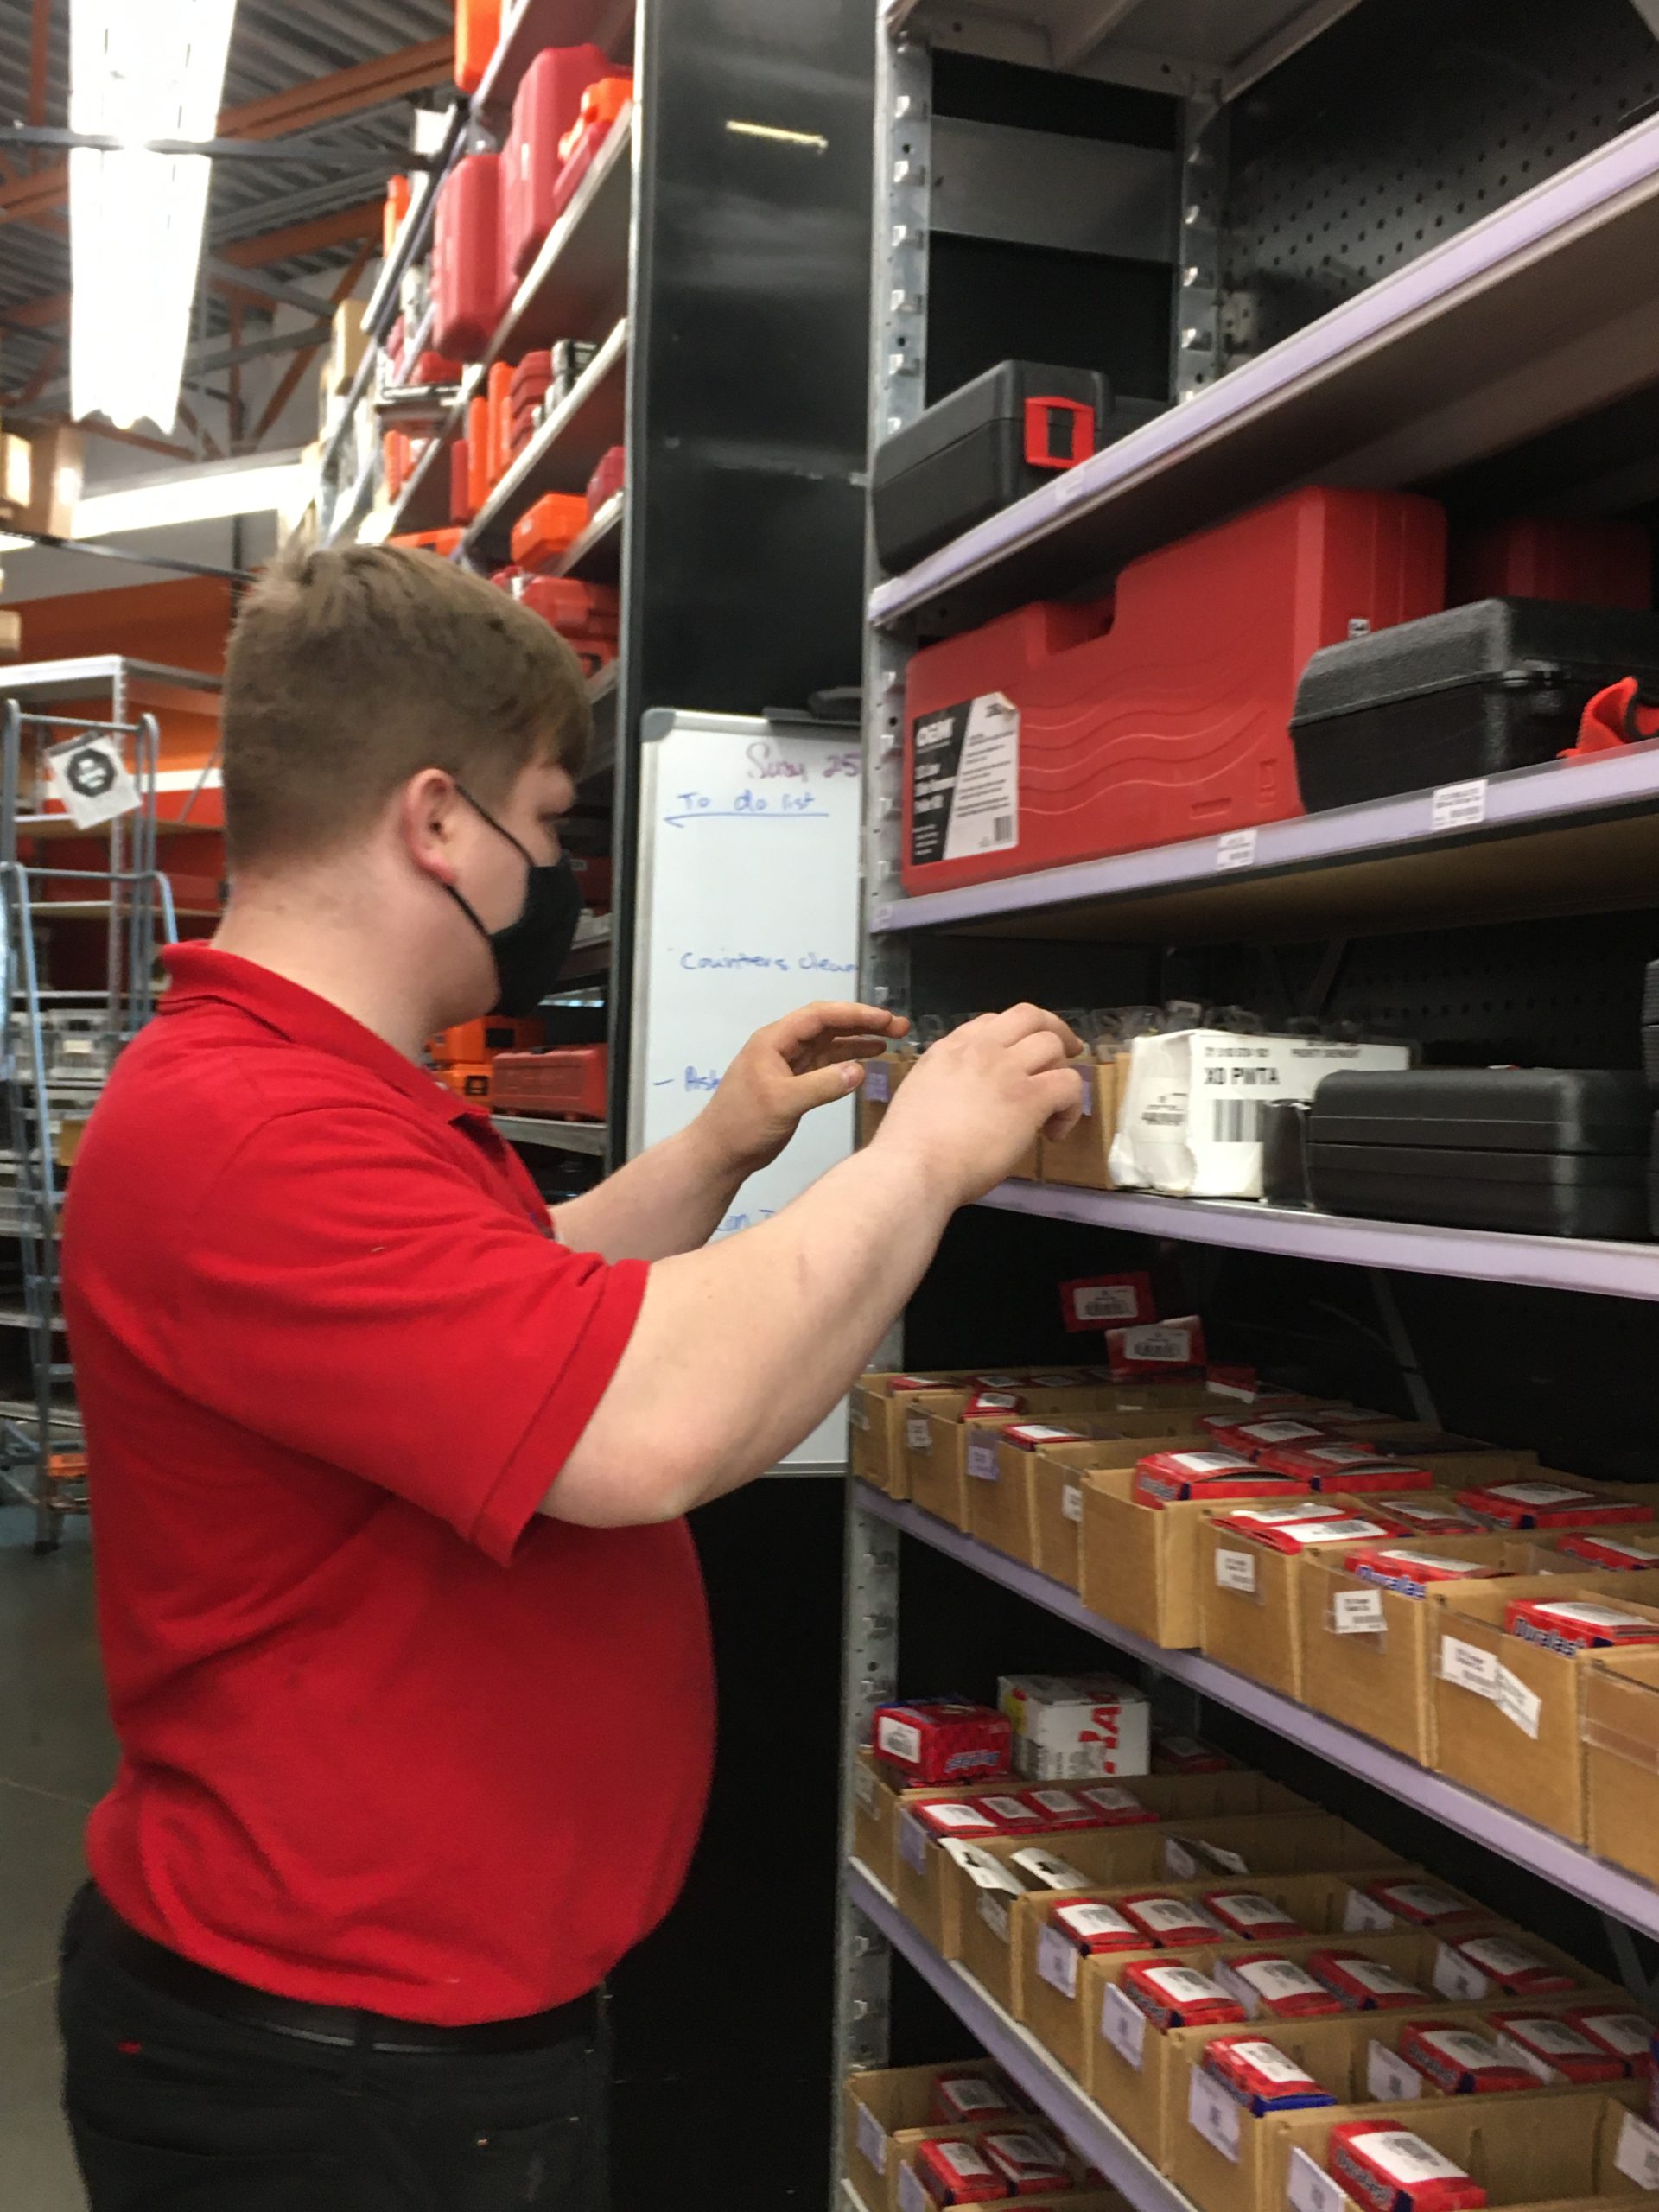 Image: Man with brown hair and red shirt looks for an automotive part on the shelf at Autozone. Profile view.